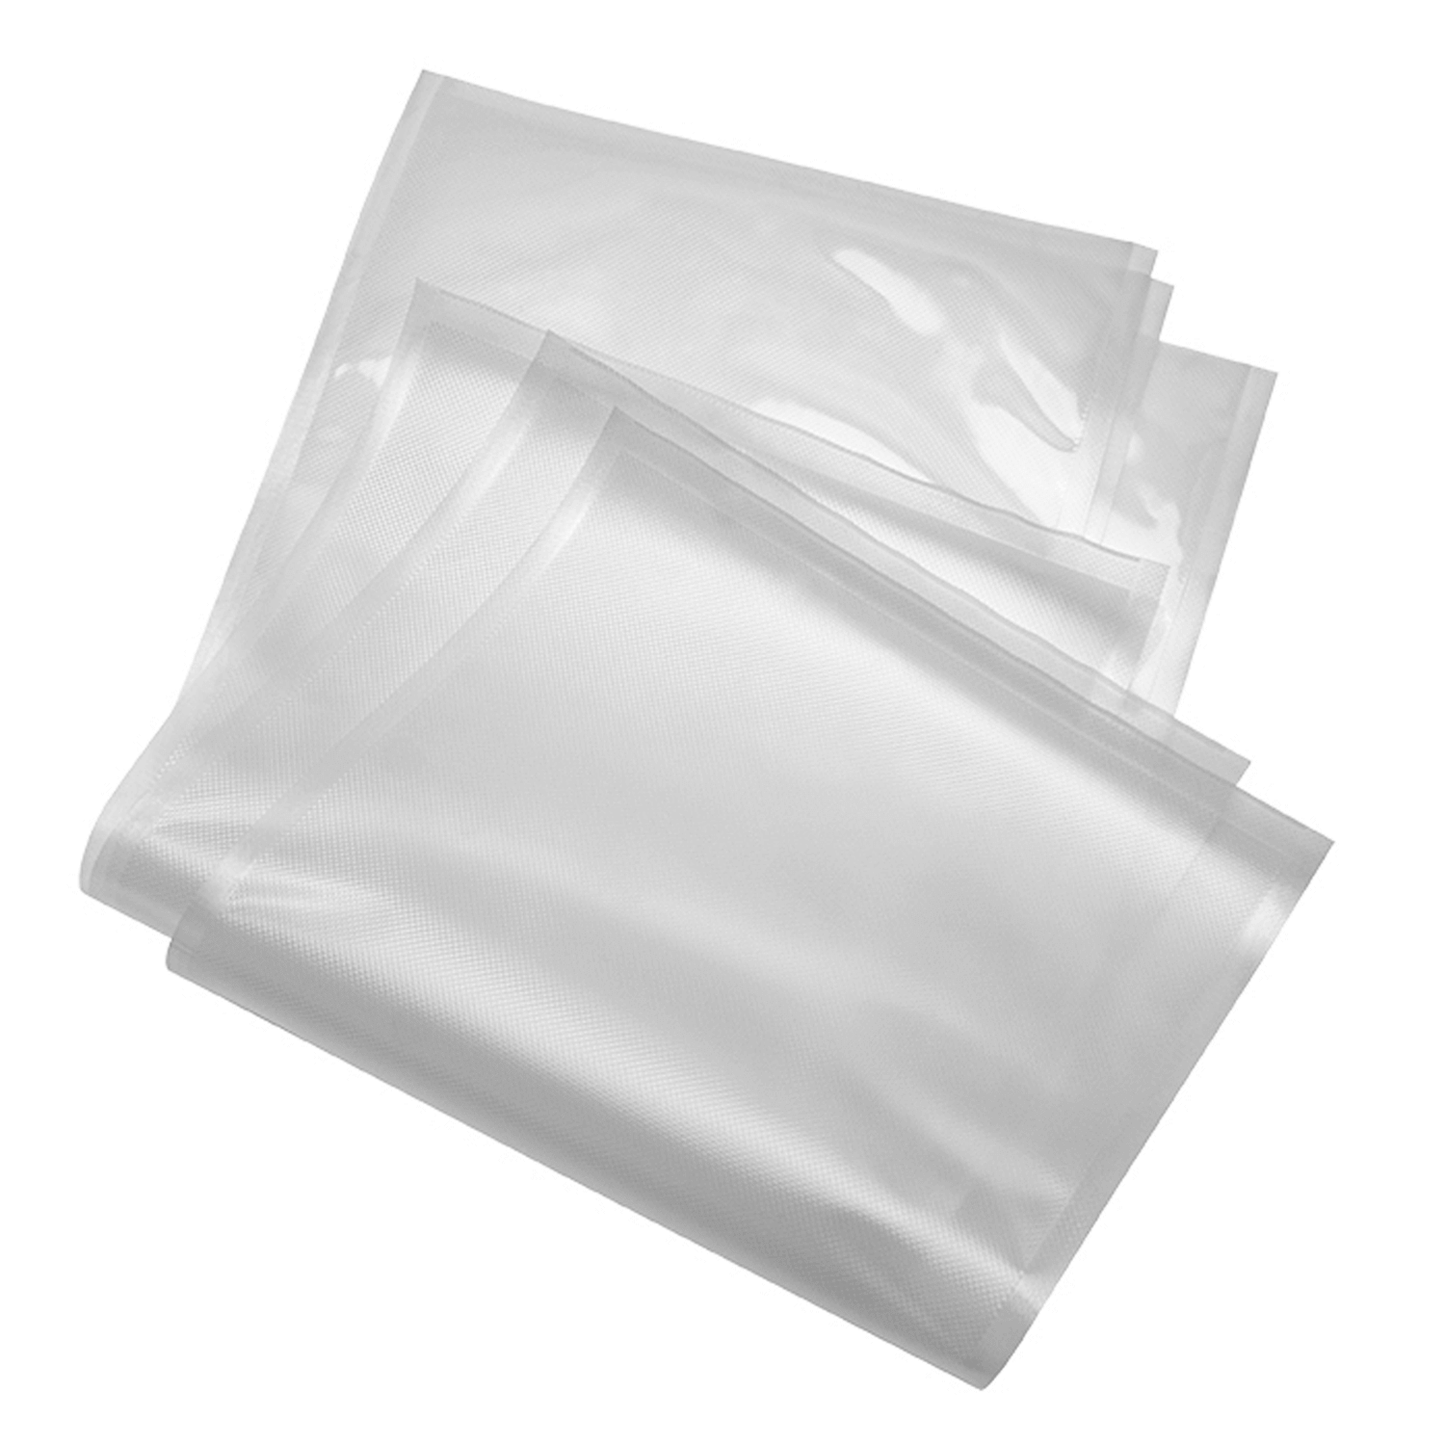 ArmorVac 11"x24" 5mil Precut Vacuum Seal Bags All Clear (50 Pack) 131124CR50 Harvest & Extraction